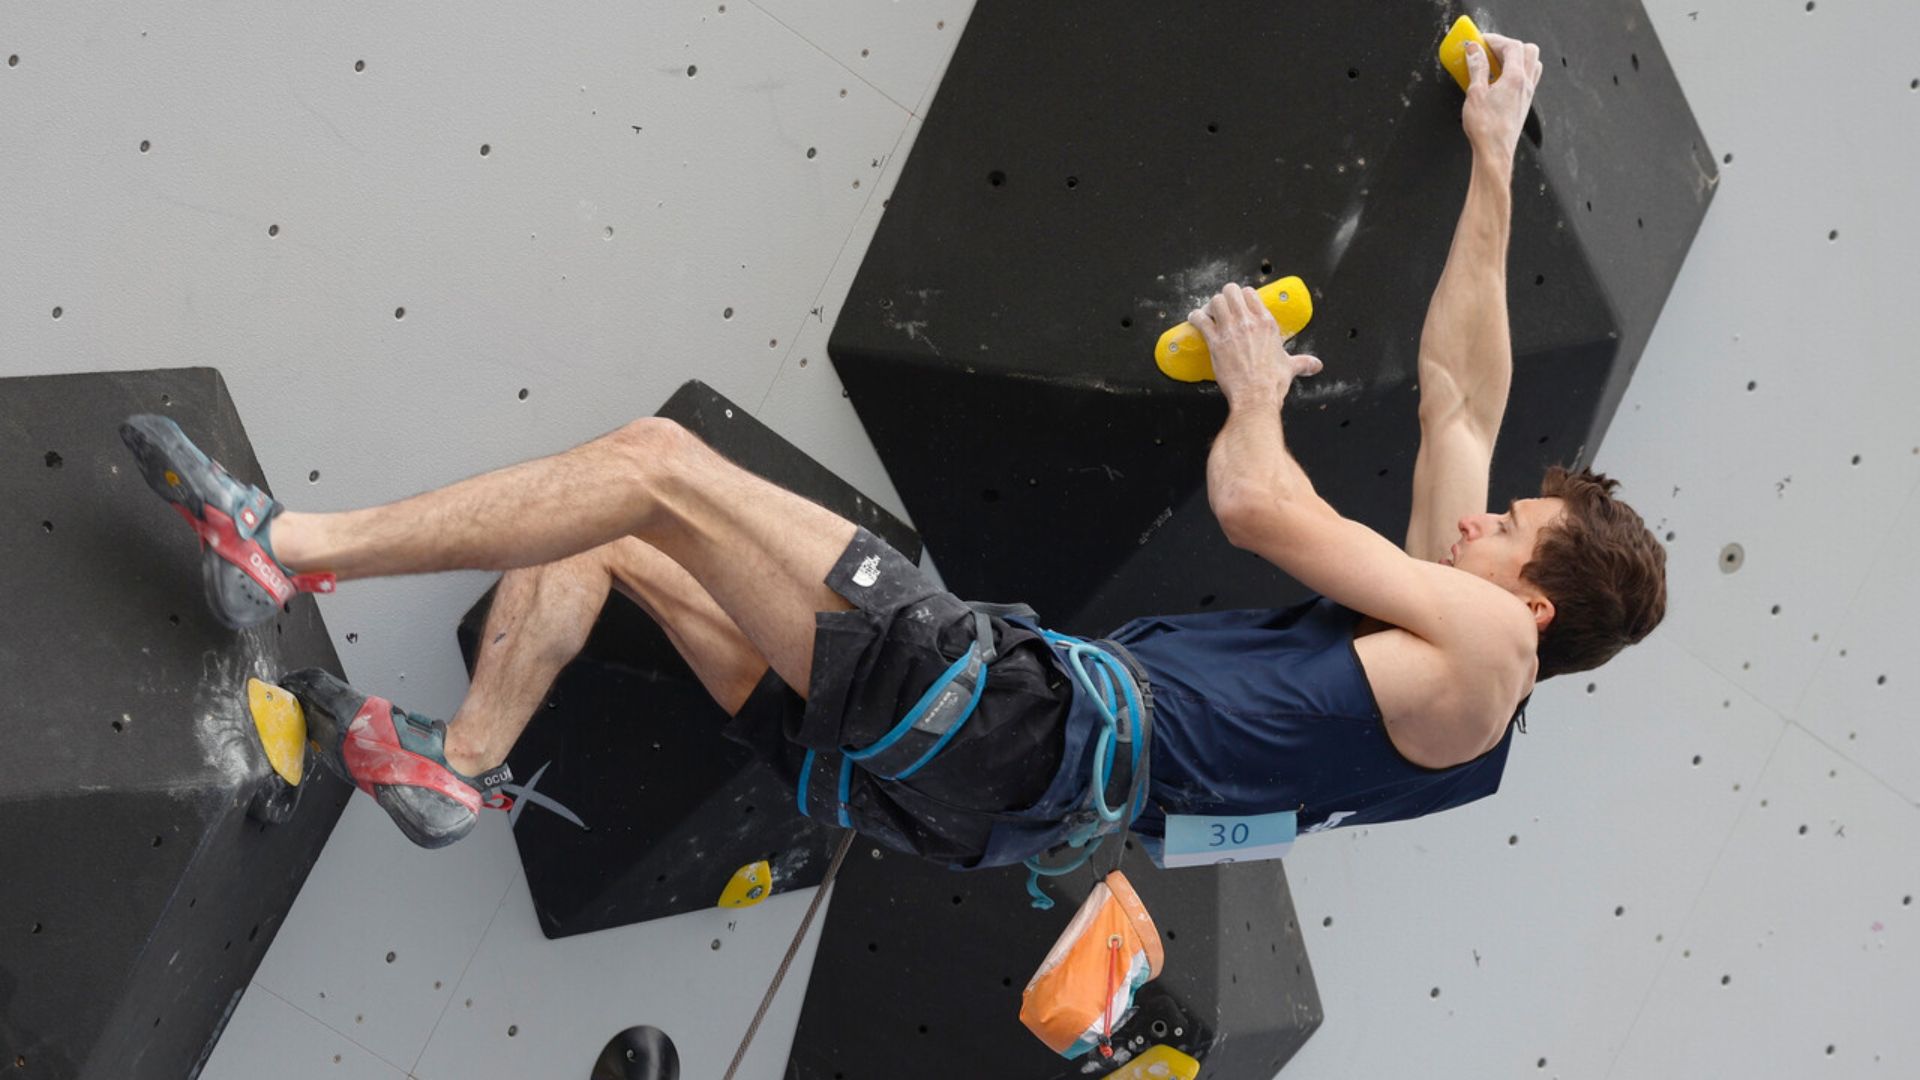 Climbing Semi-Finals Dominated by Jesse Grupper